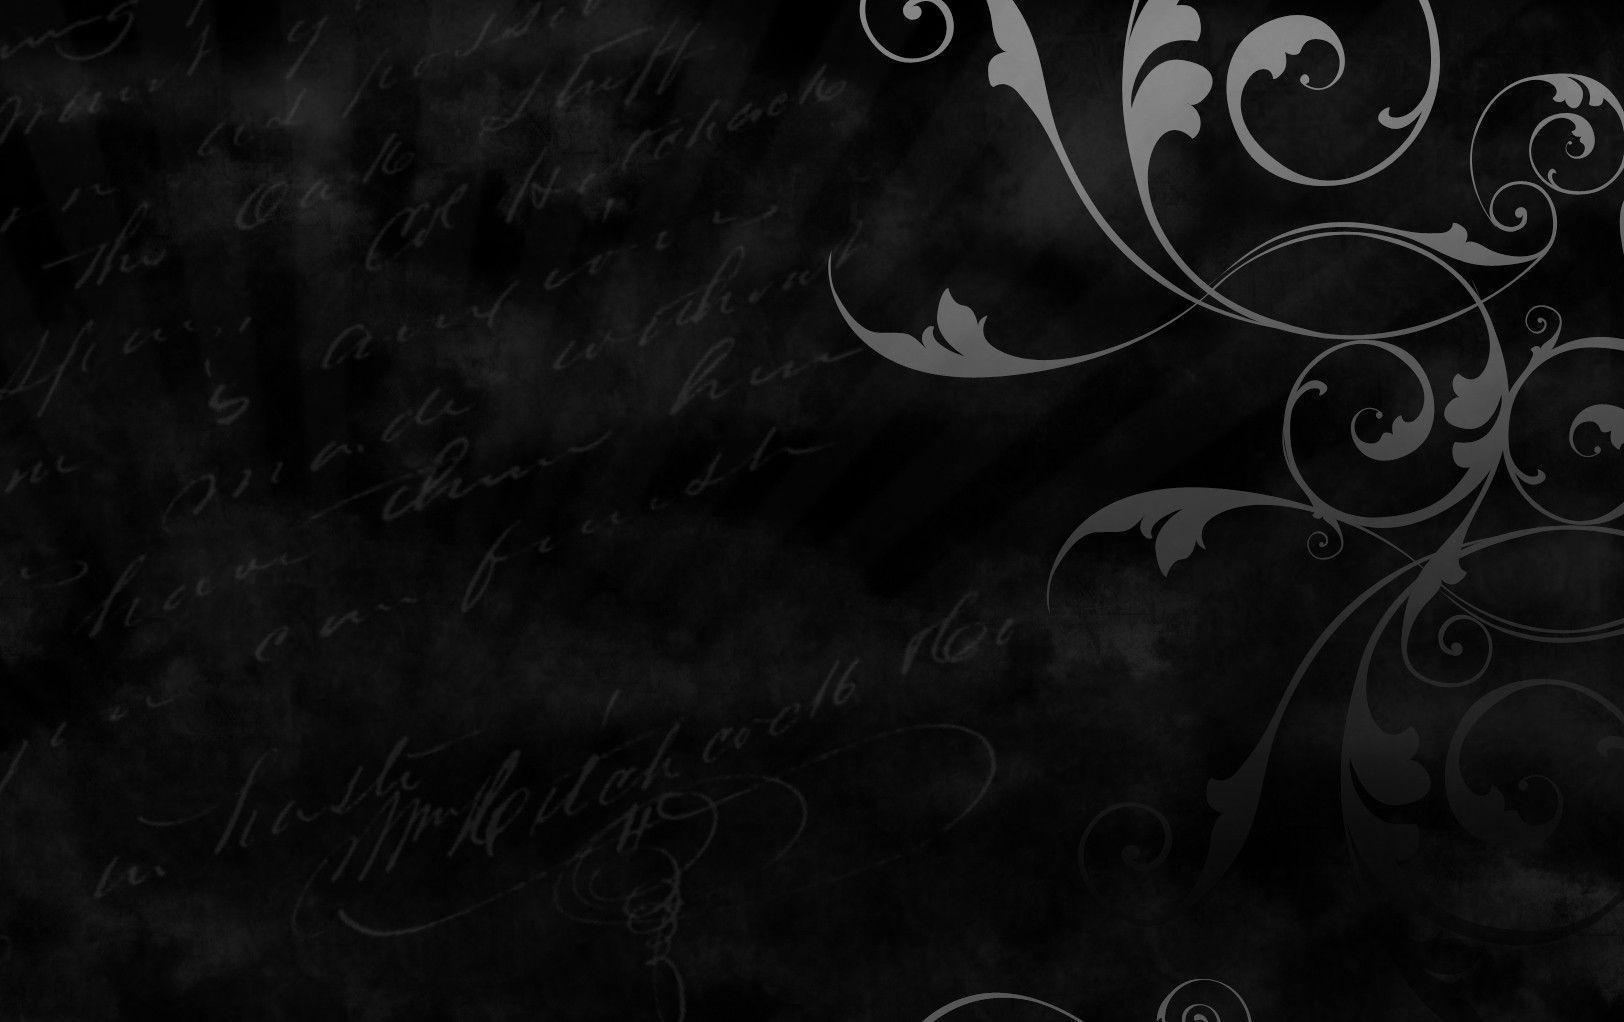 Awesome Abstract Wallpaper Black Wallpaper. lookwallpaper